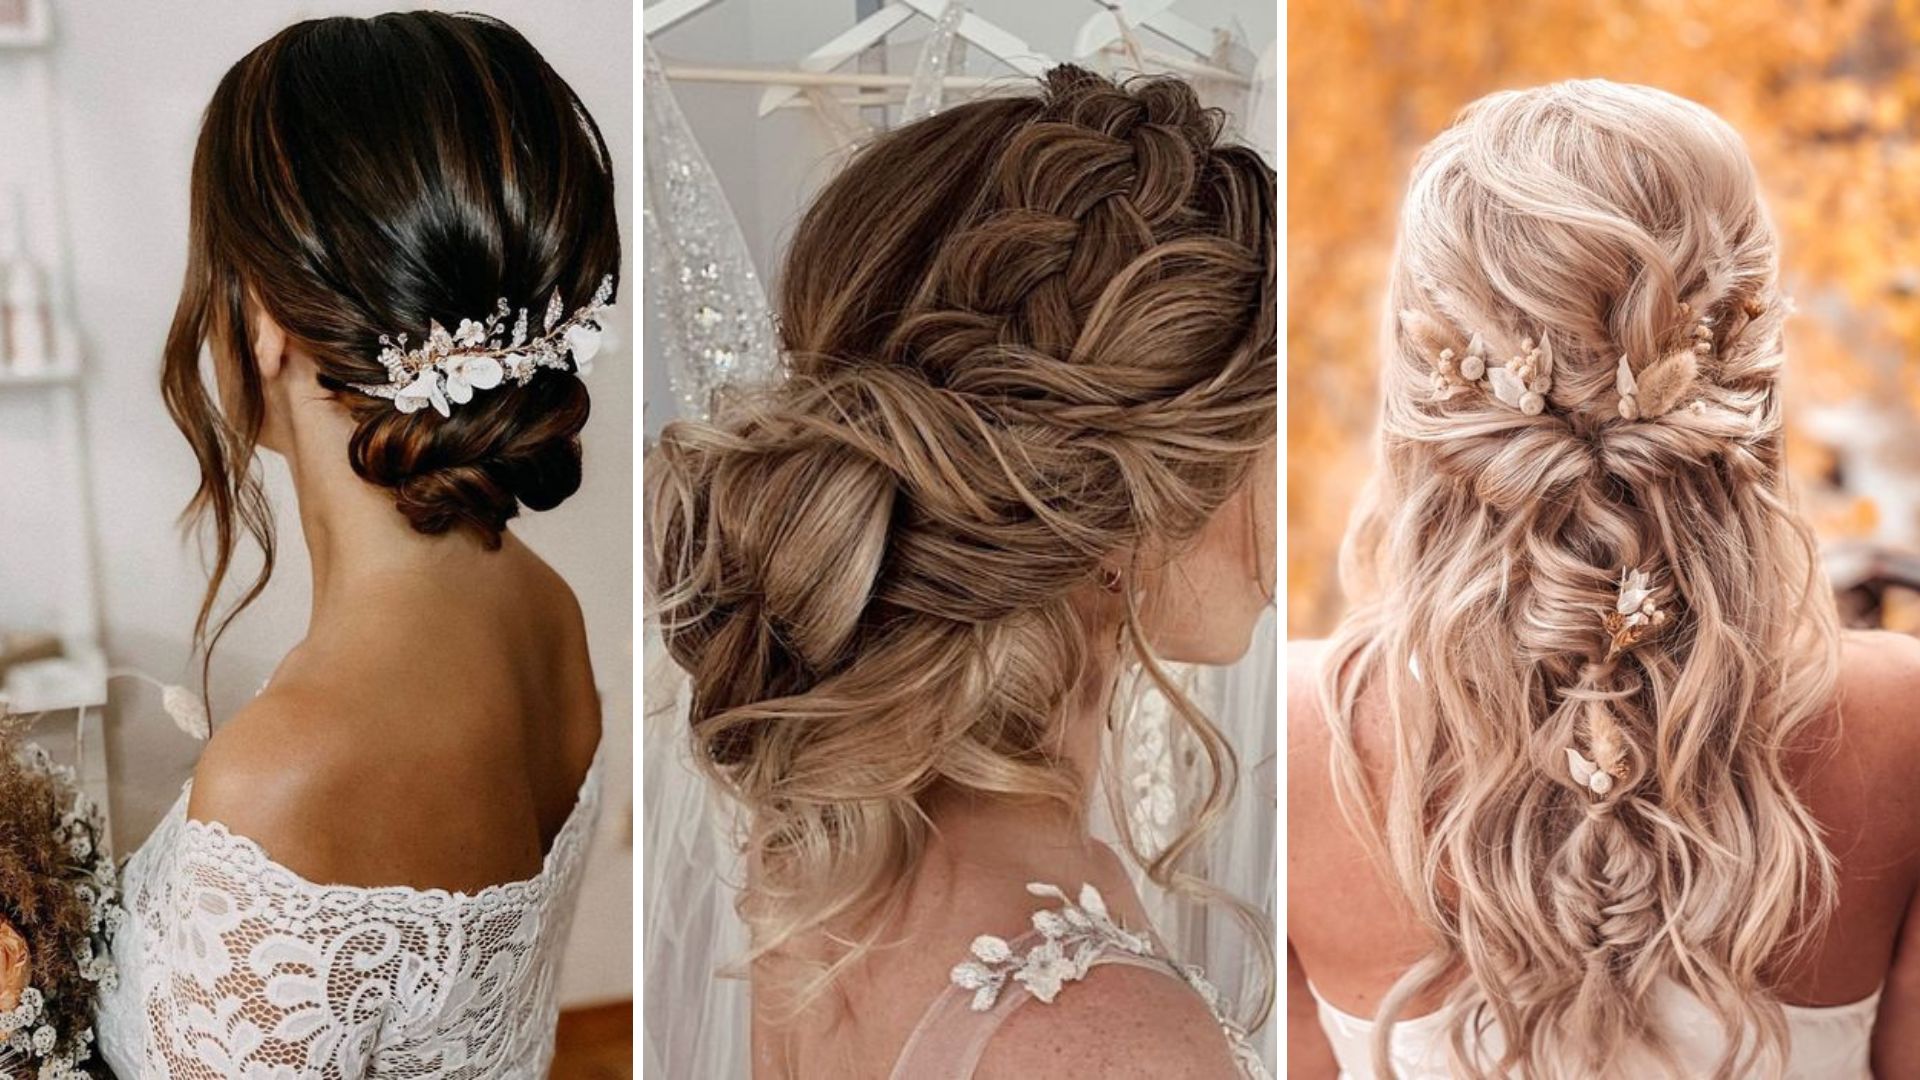 14 Wedding Hairstyles to Make Your Dream Wedding a Reality